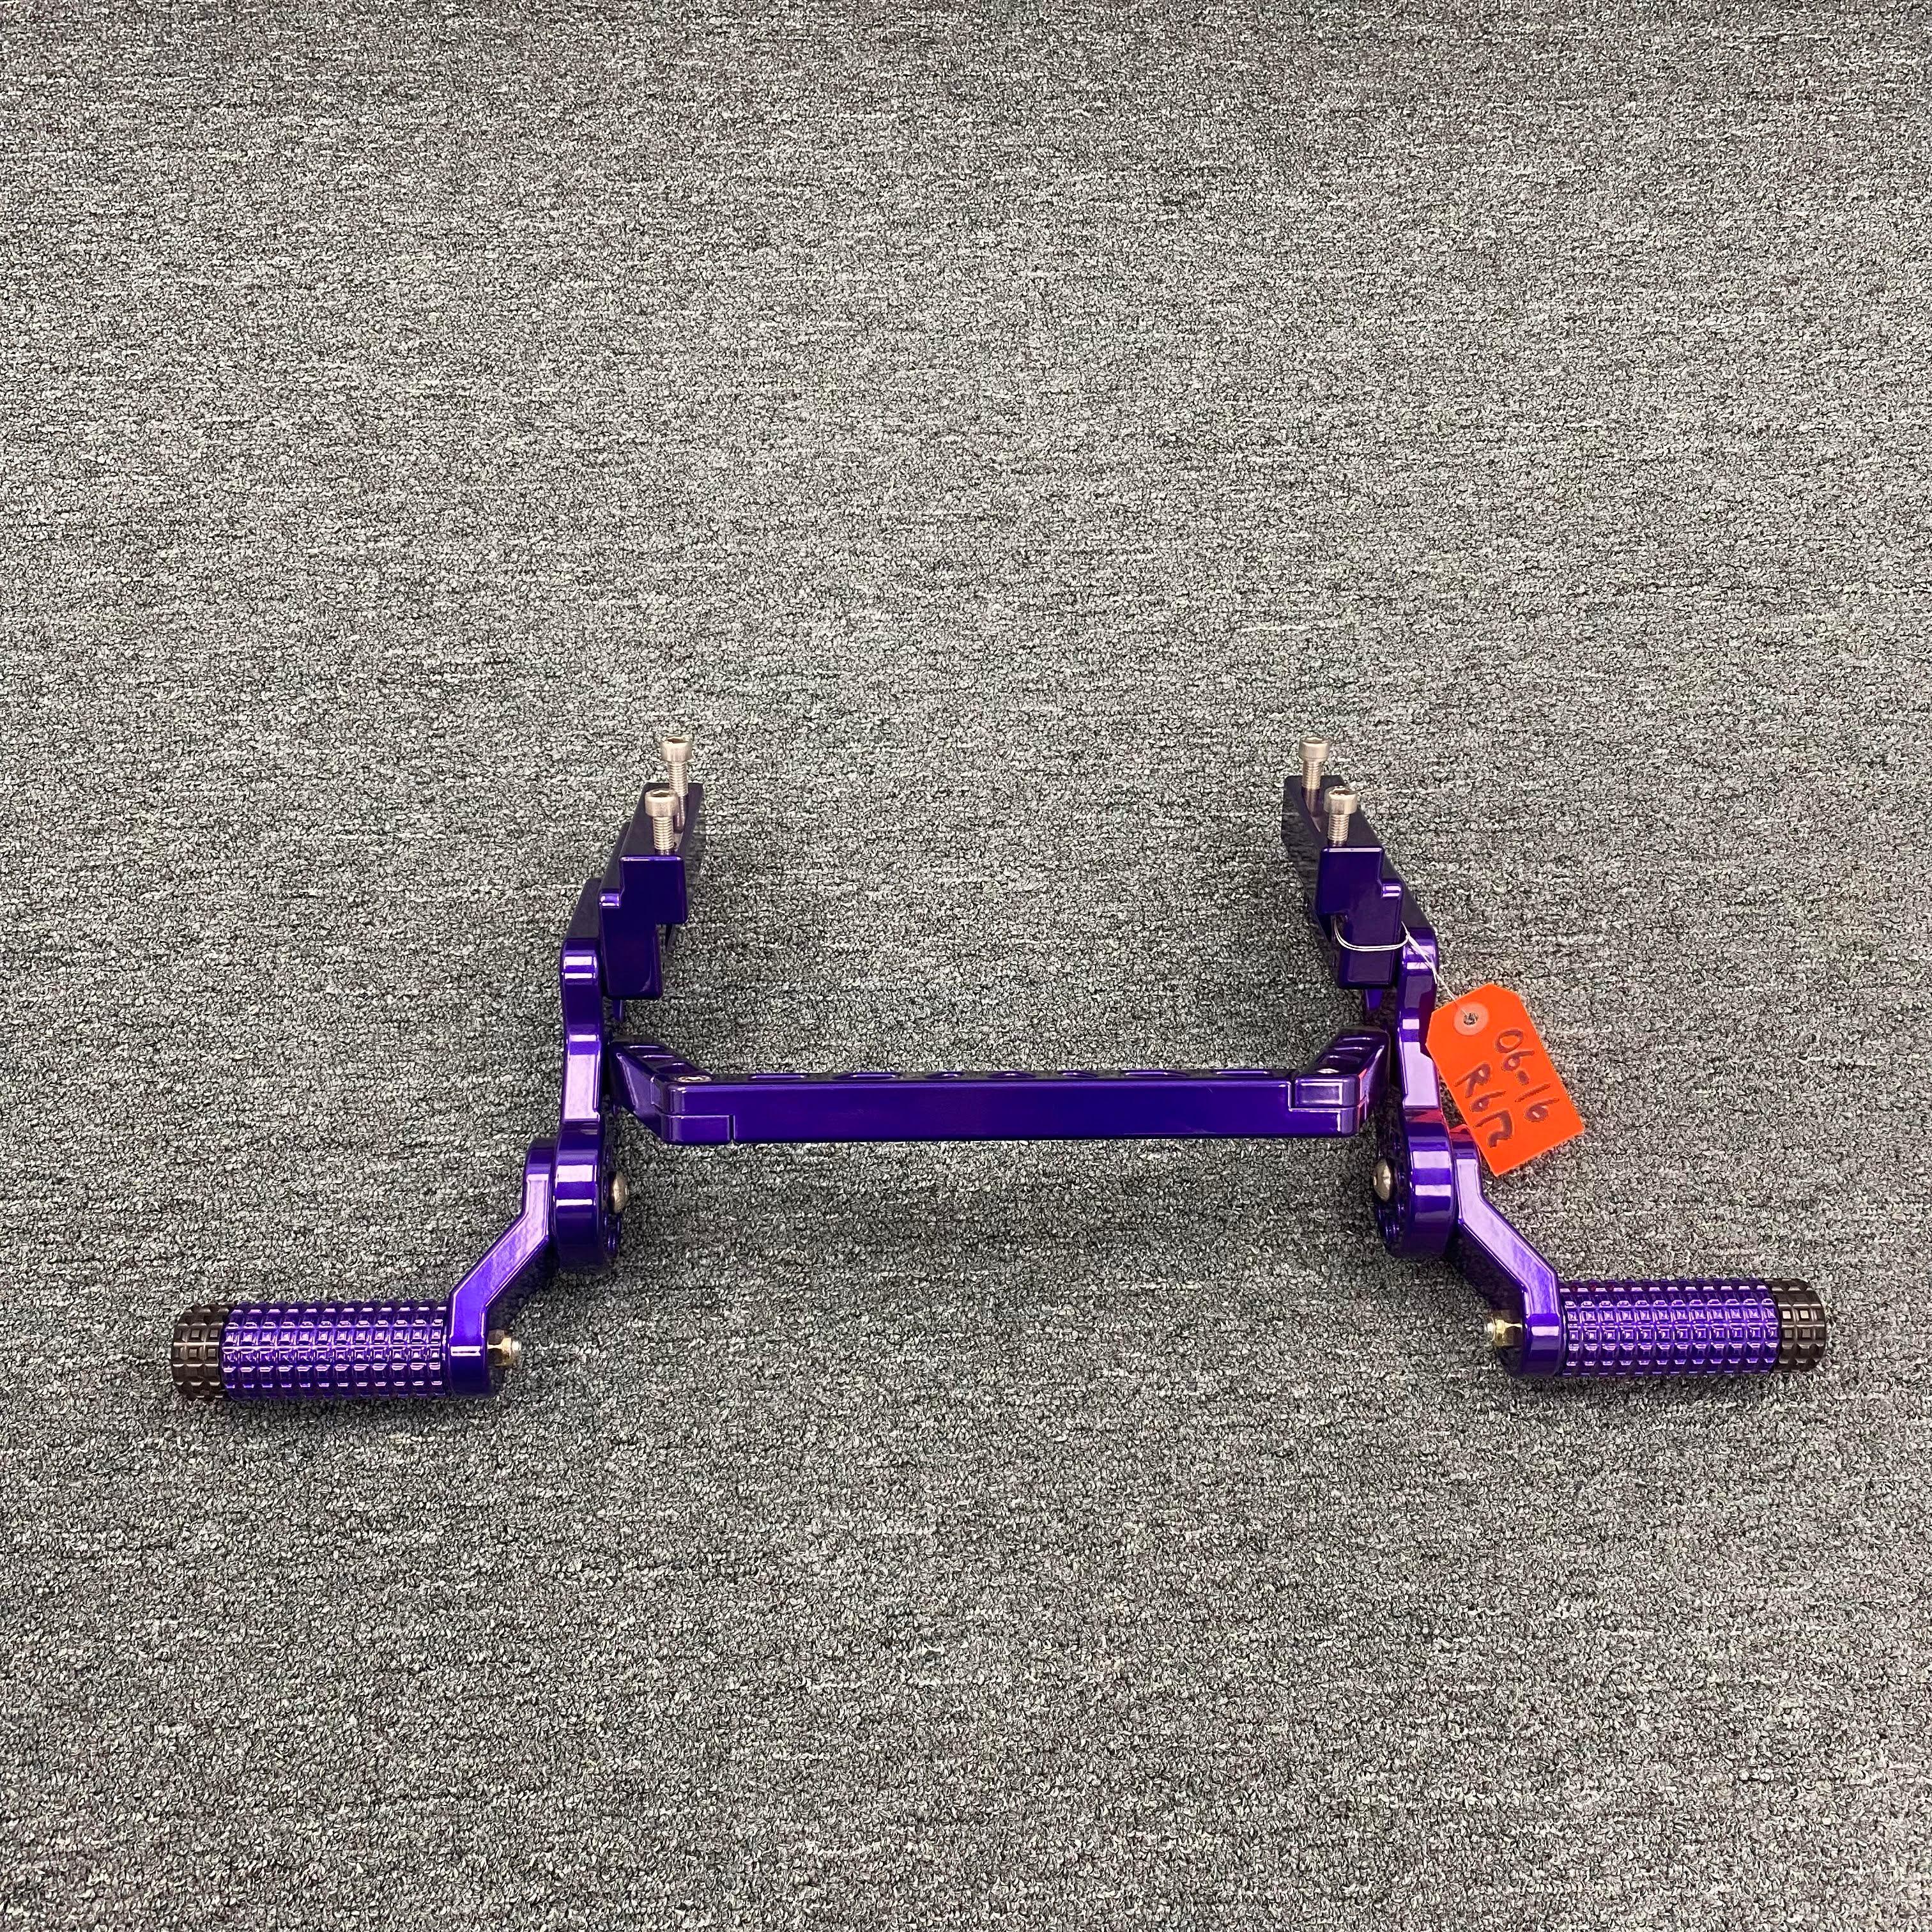 Yamaha 2006-2016 R6 and R6R Adjustable Subcage (Candy Purple) - ImpakTech